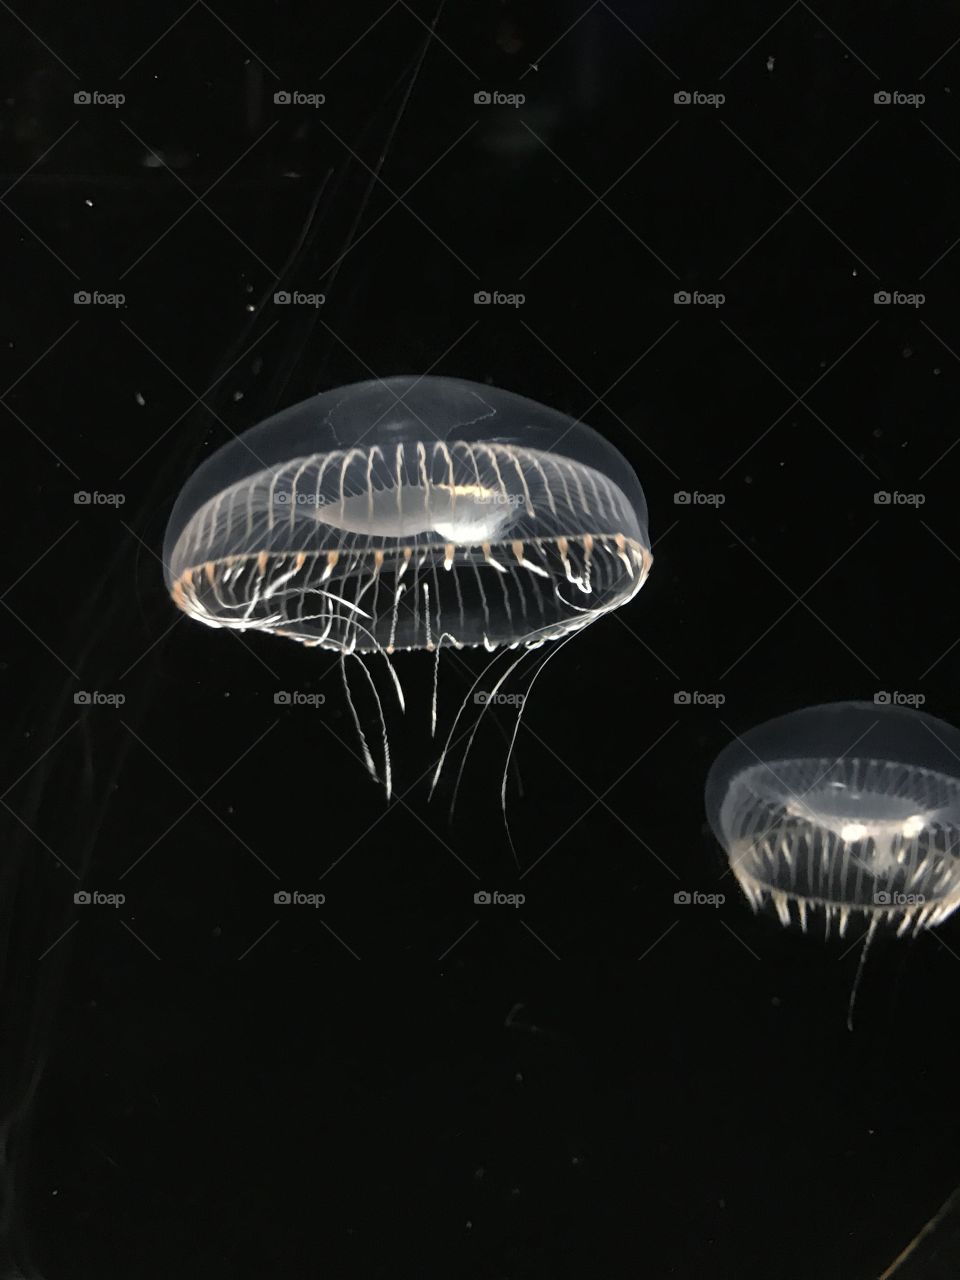 Floating Jelly Fish 